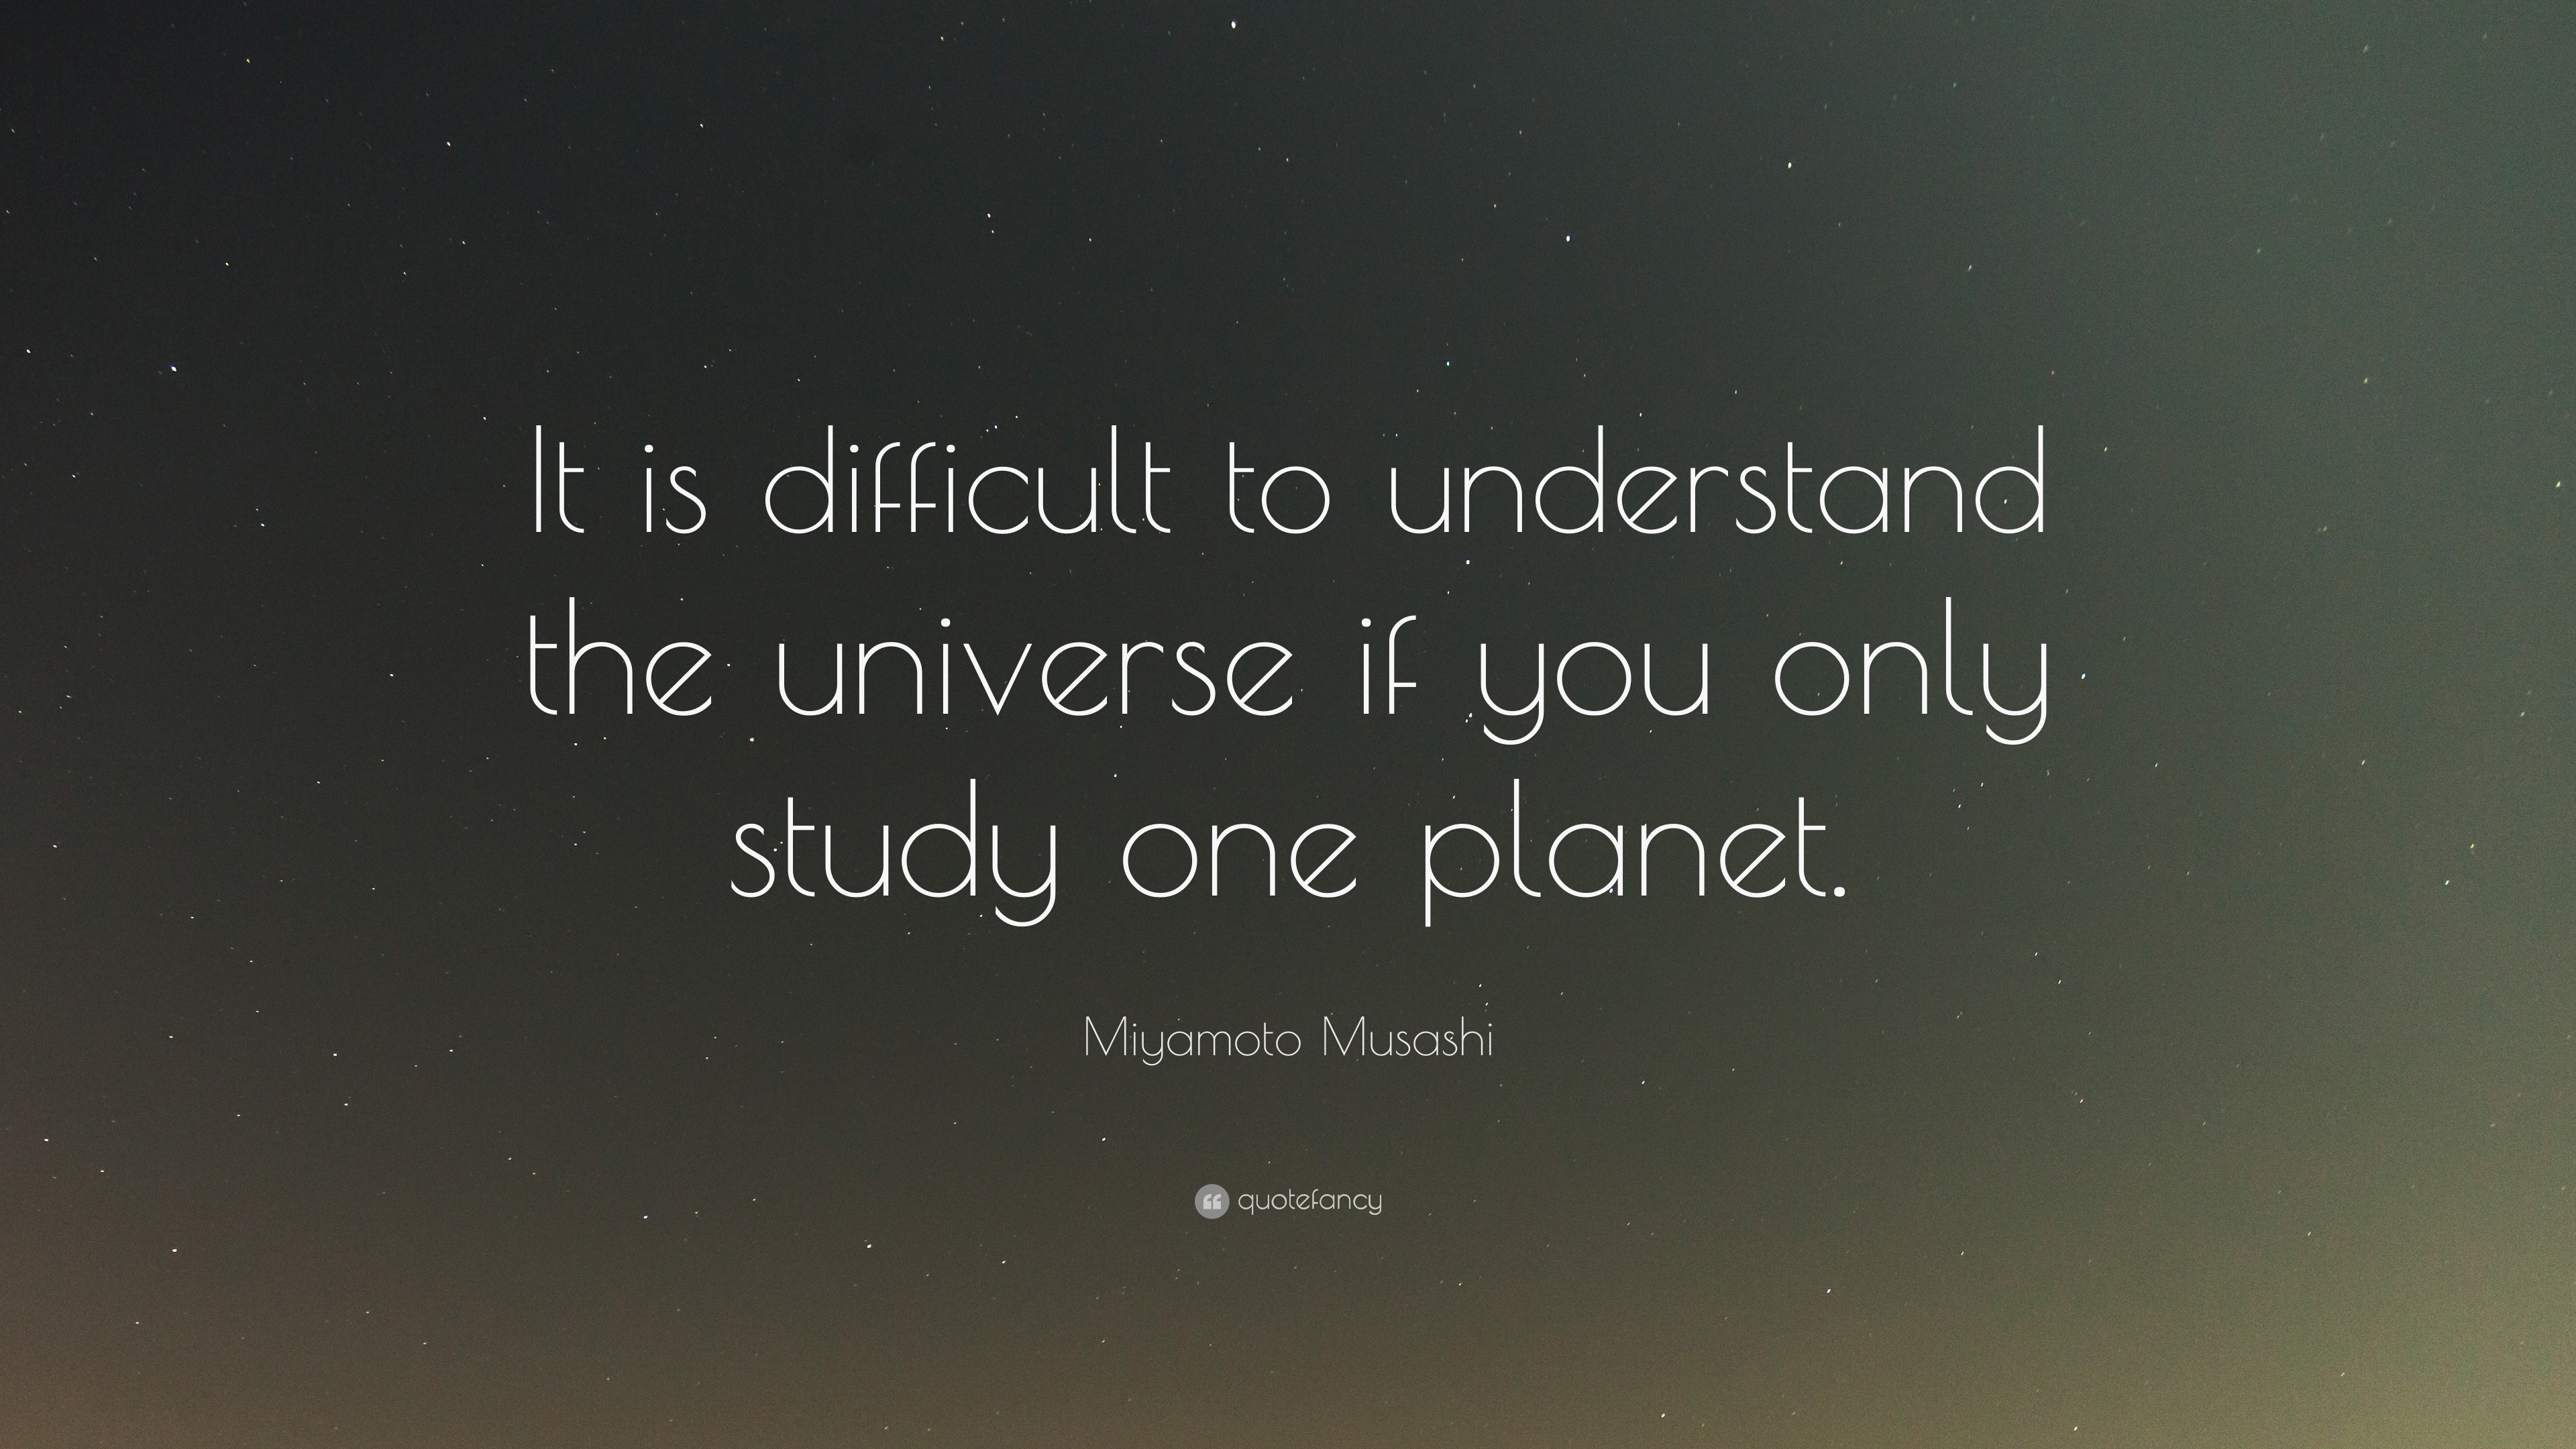 Space Quotes (32 wallpapers) - Quotefancy